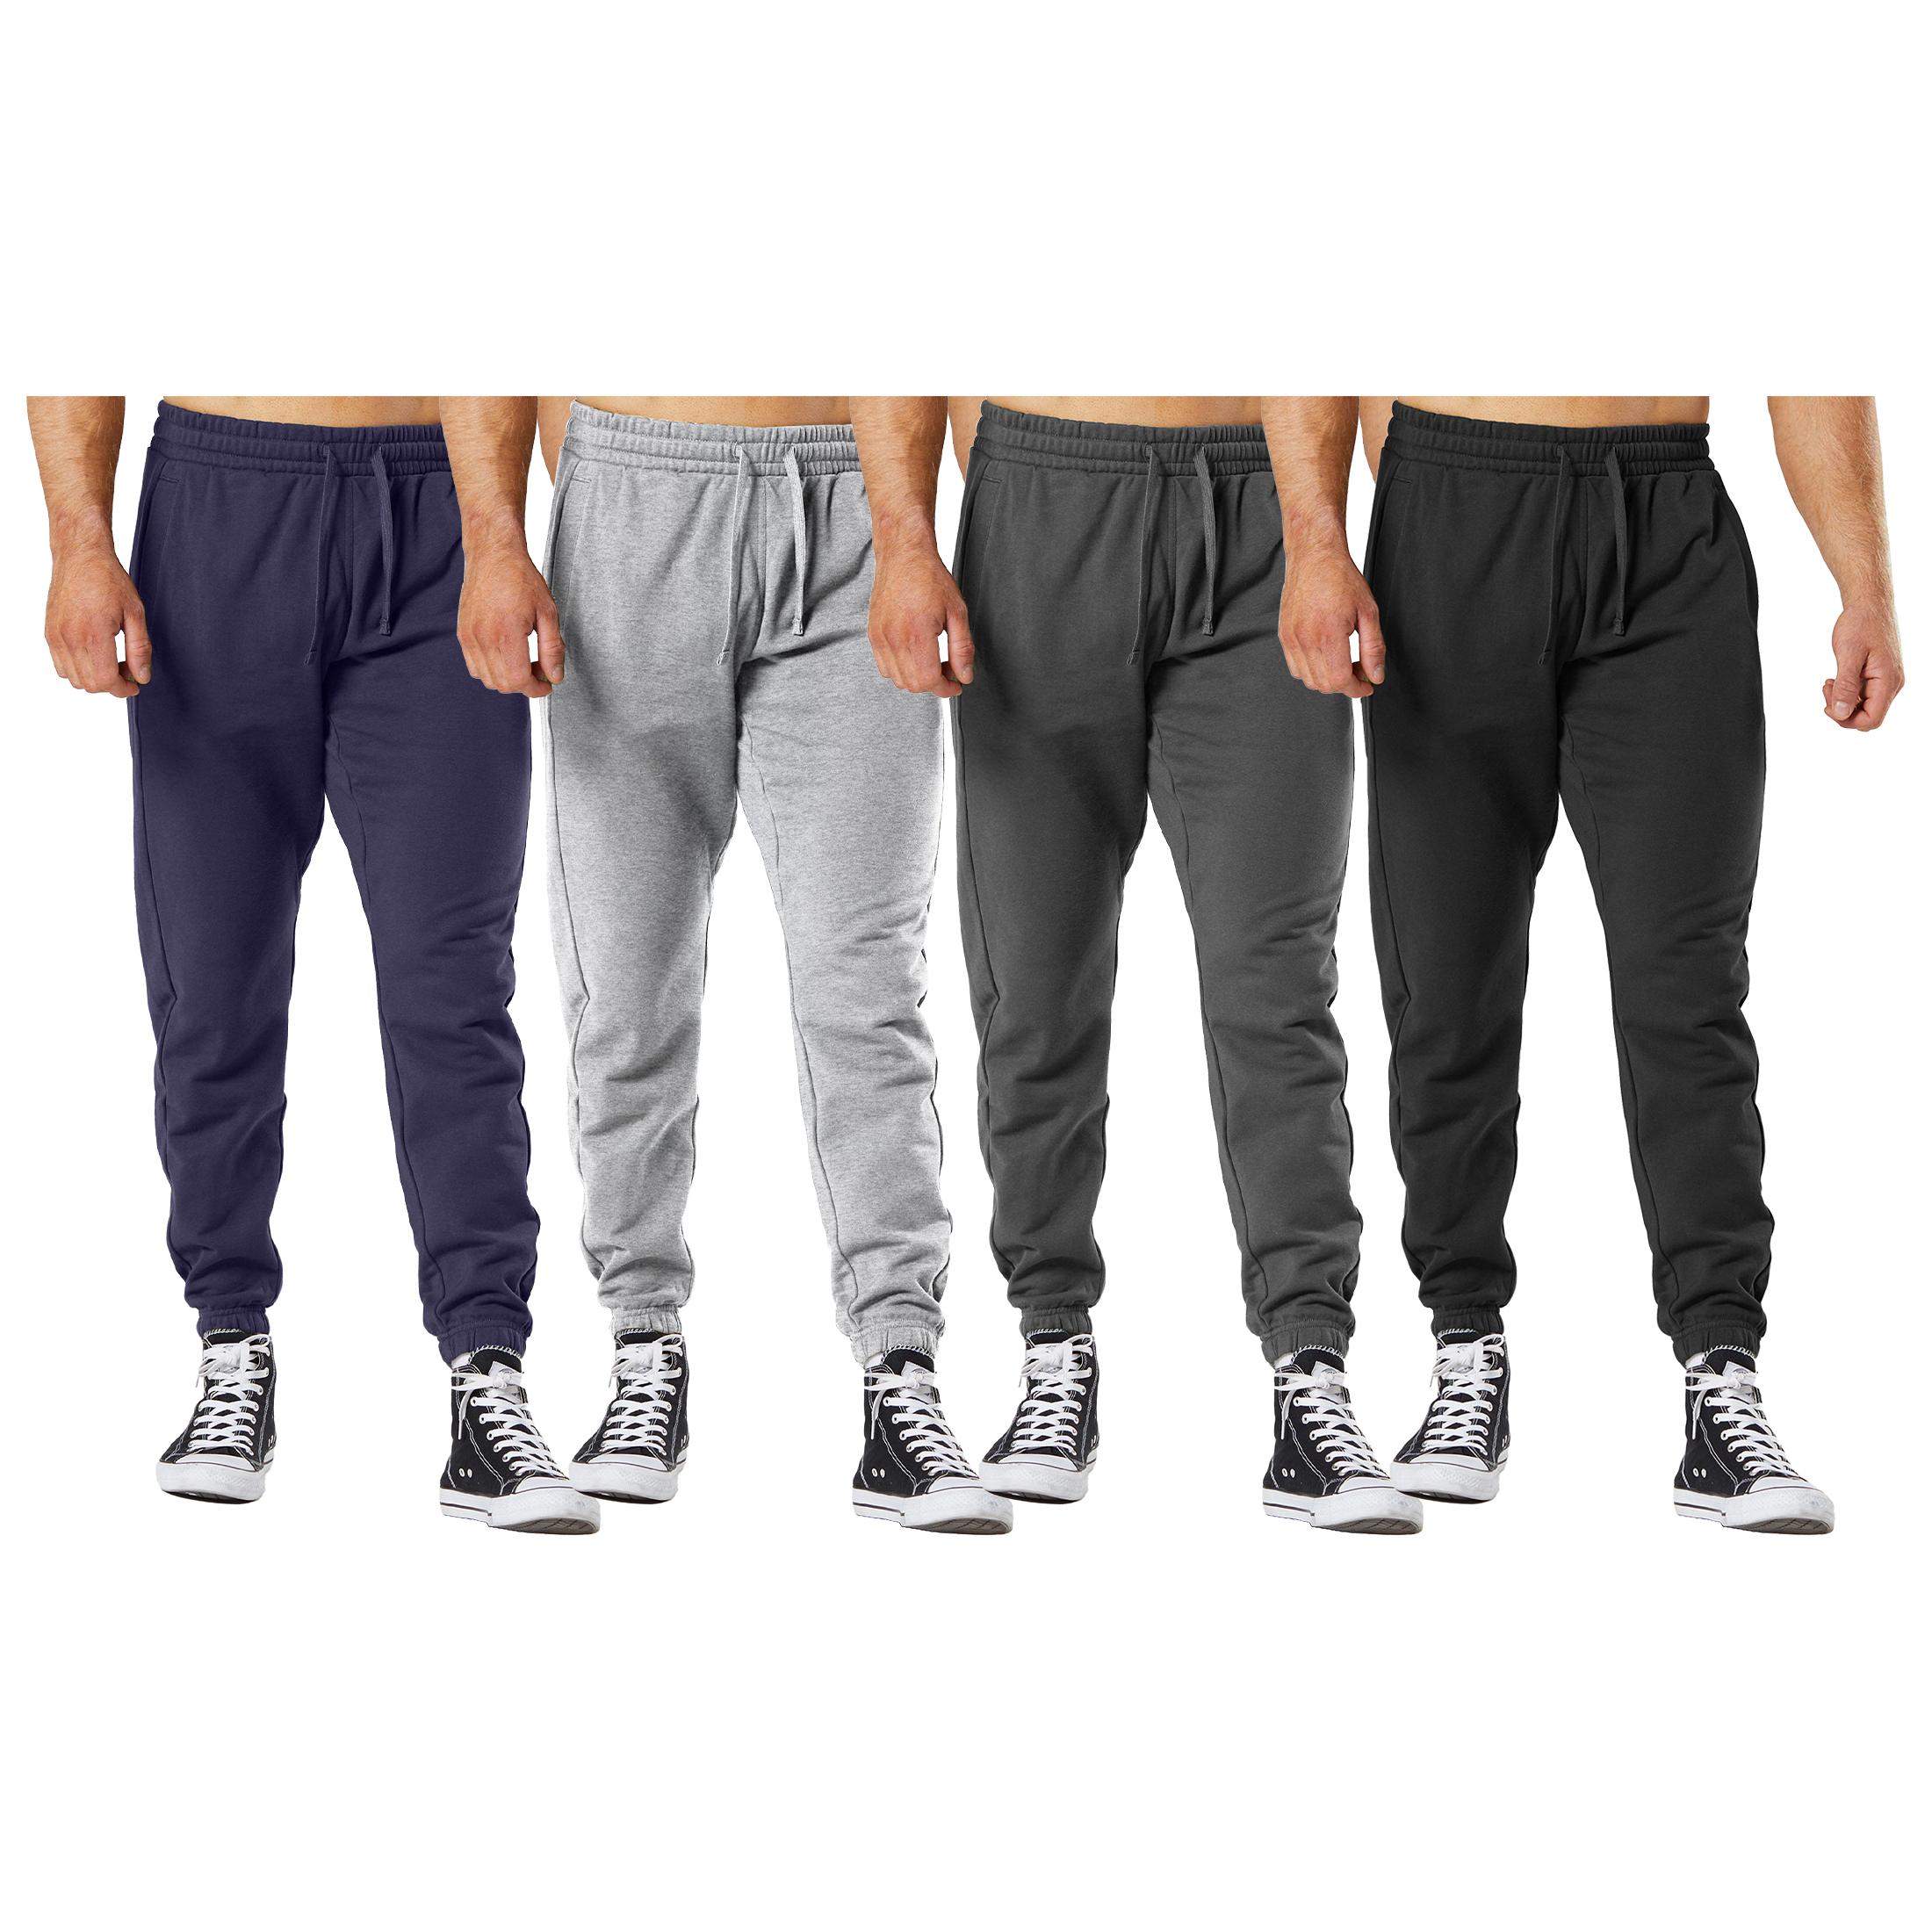 3-Pack: Men's Casual Fleece-Lined Elastic Bottom Sweatpants Jogger Pants With Pockets - Solid, X-Large